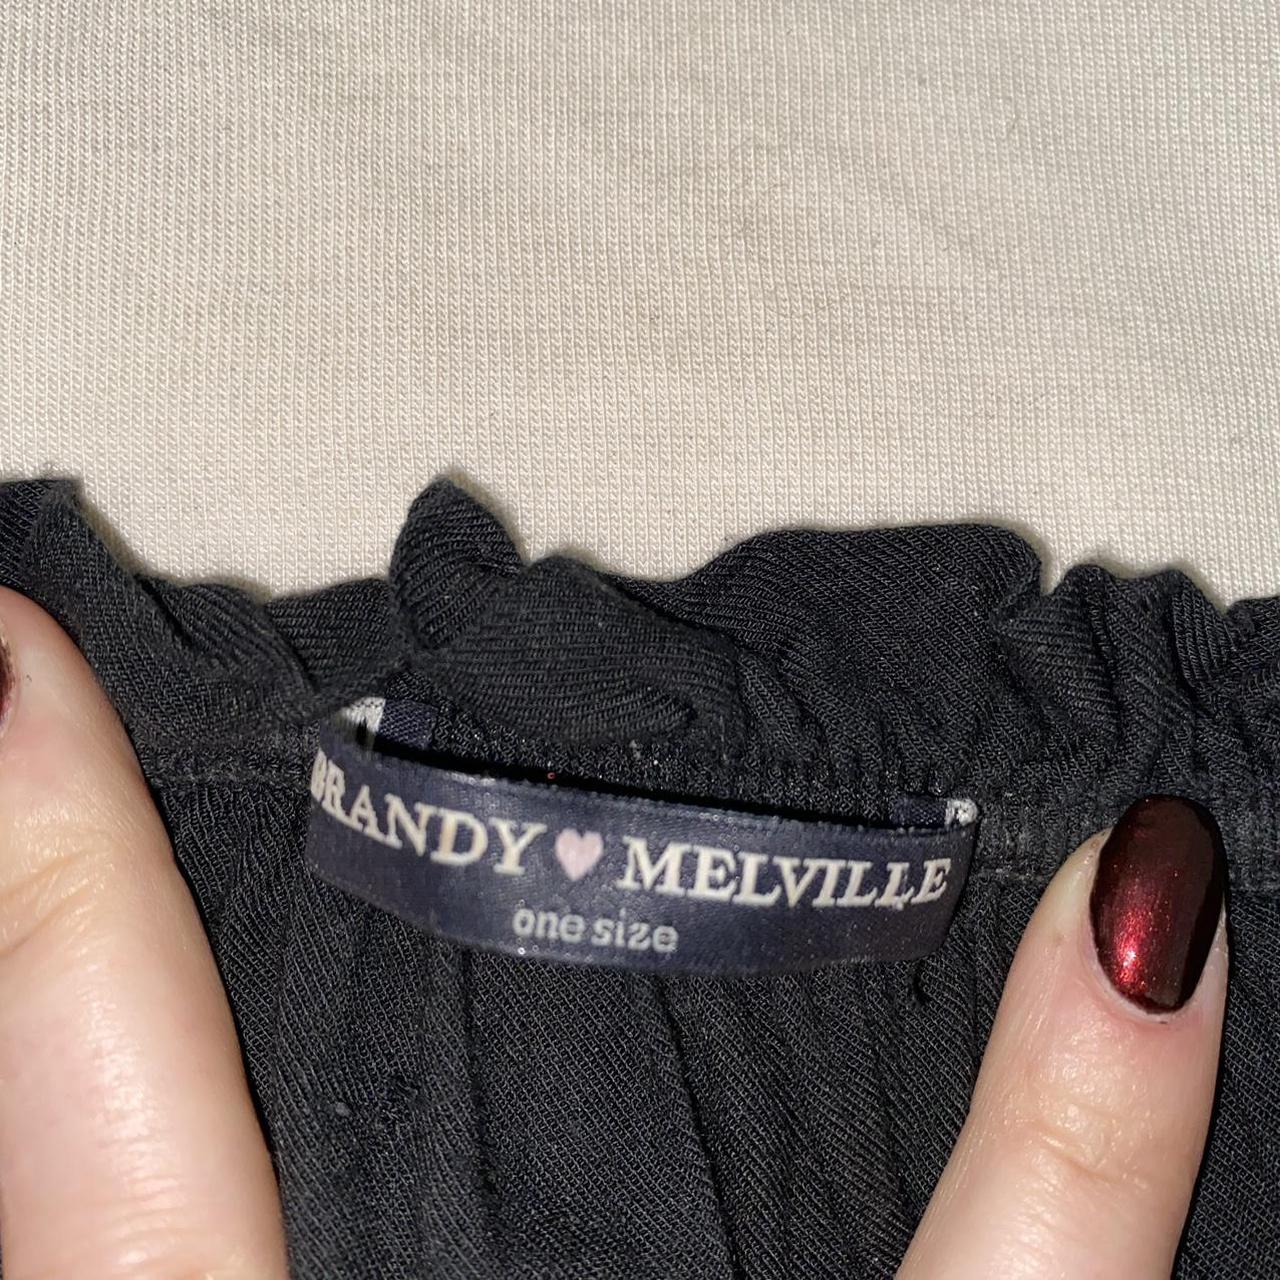 Product Image 2 - The most lovely Brandy Melville